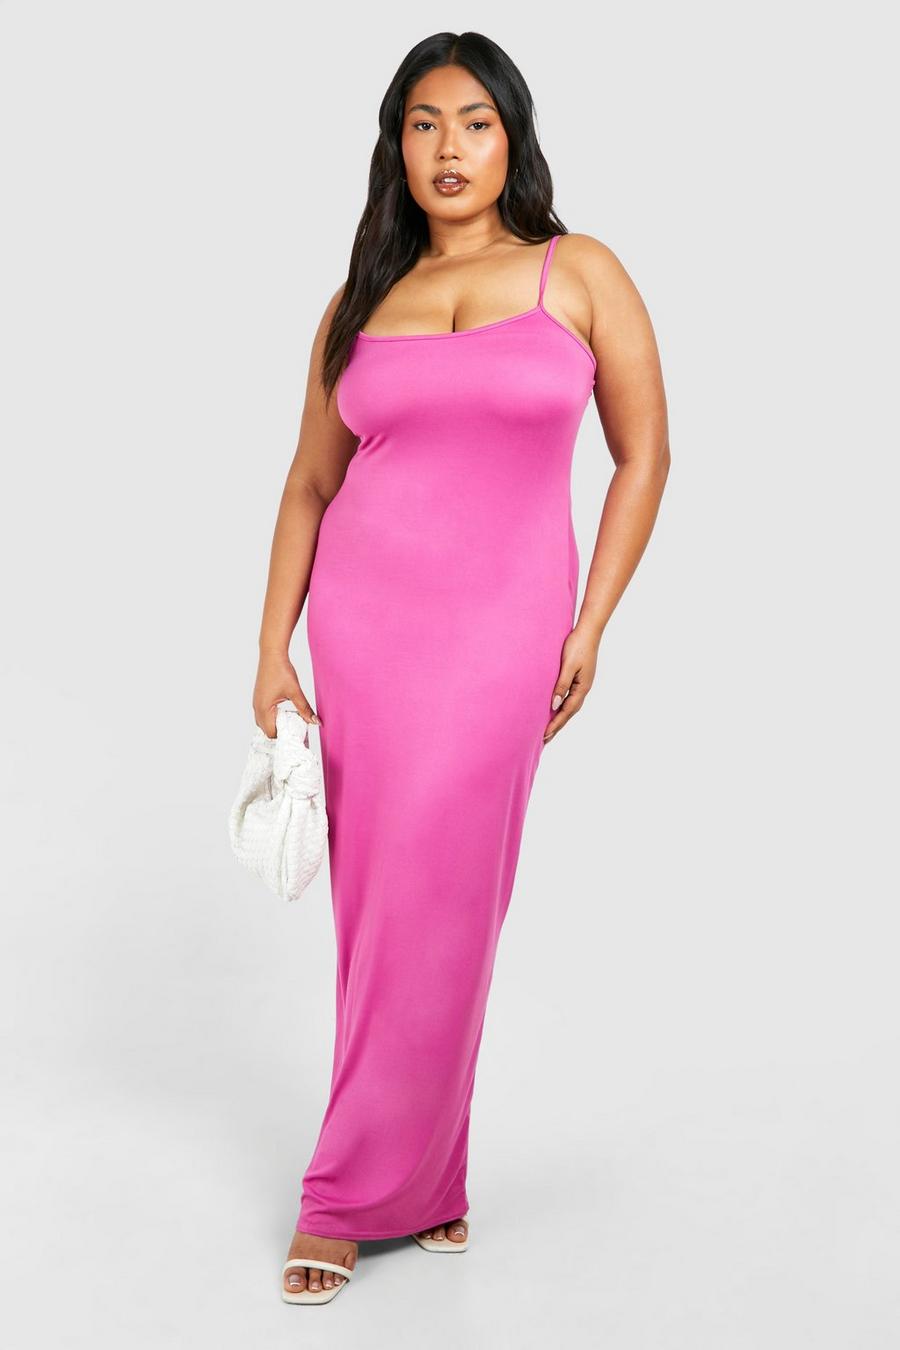 Grande taille - Robe longue à col rond, Hot pink image number 1